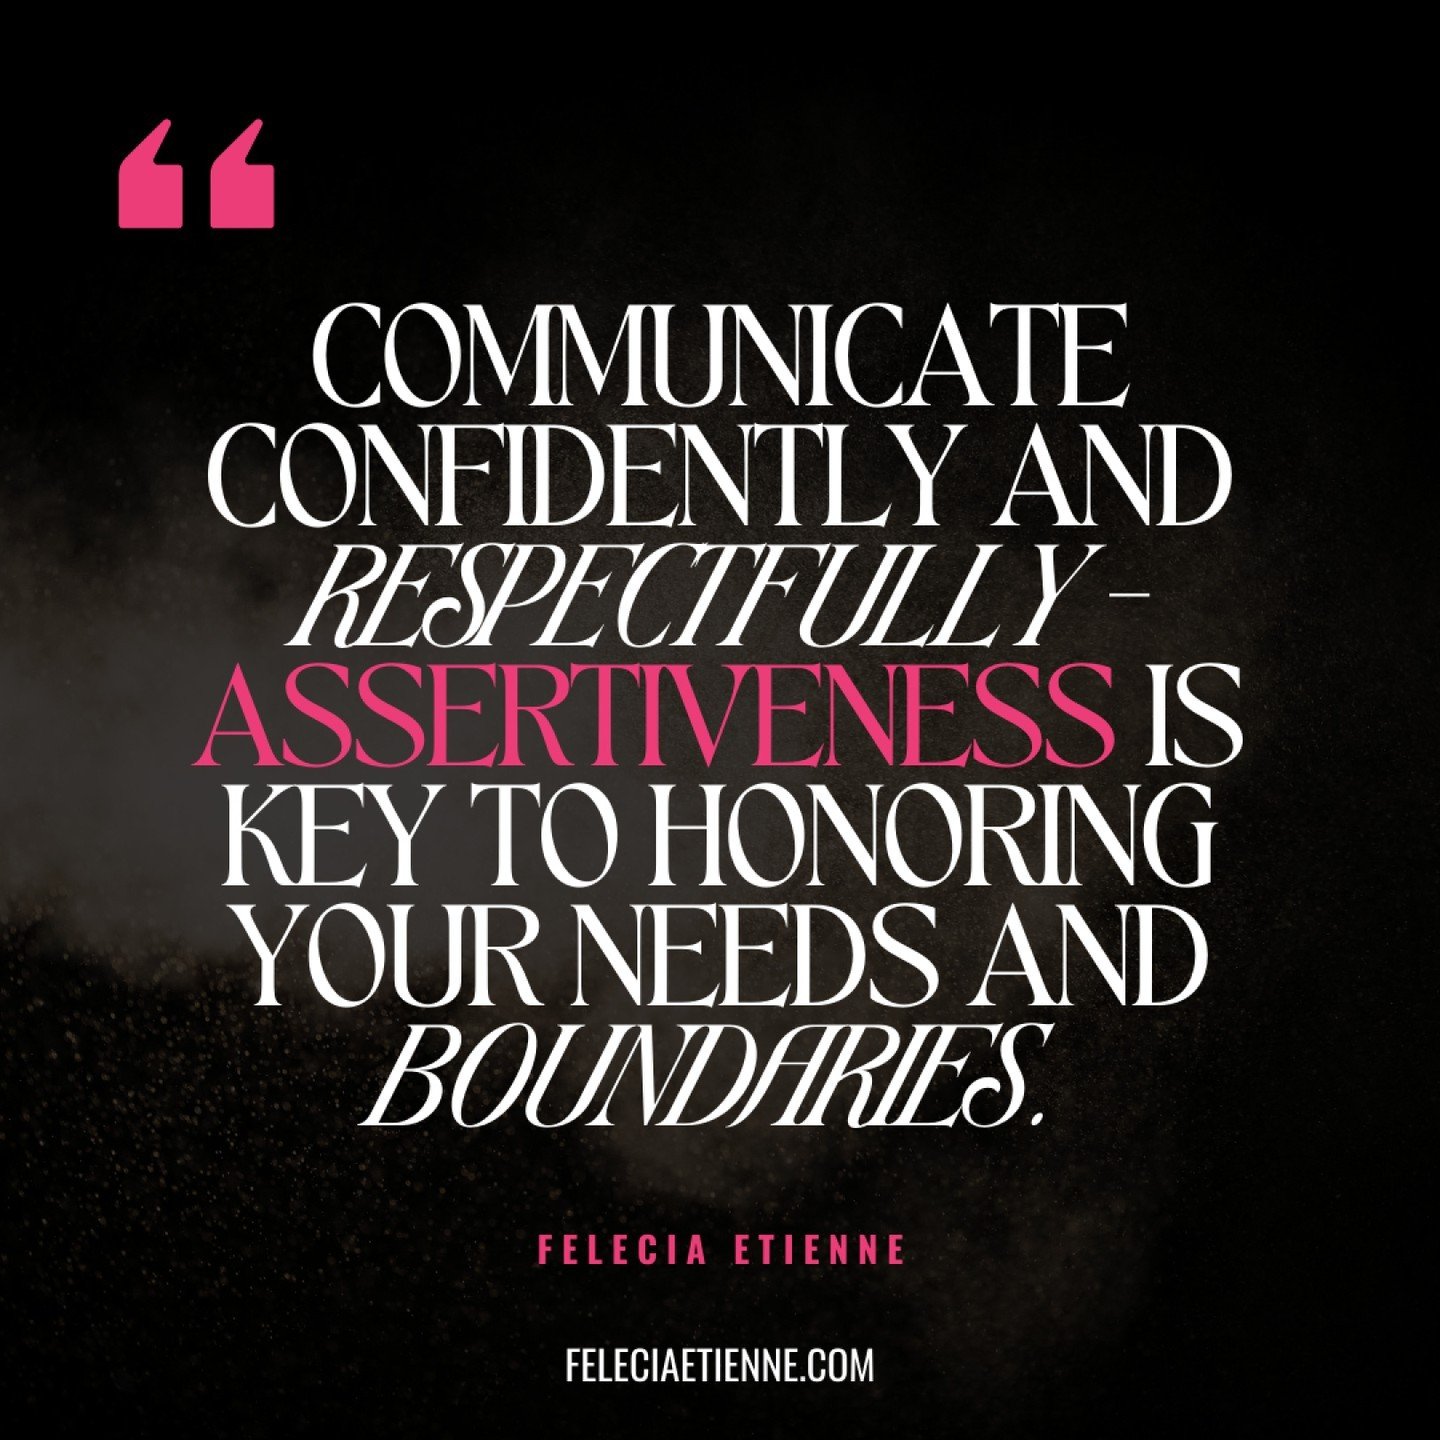 Want to boost your confidence? Start with assertive communication.

👉 Assertiveness is your superpower. It's about speaking up for yourself with confidence while respecting others.

🛑 Sometime staying silent to avoid conflict will just end up sacri